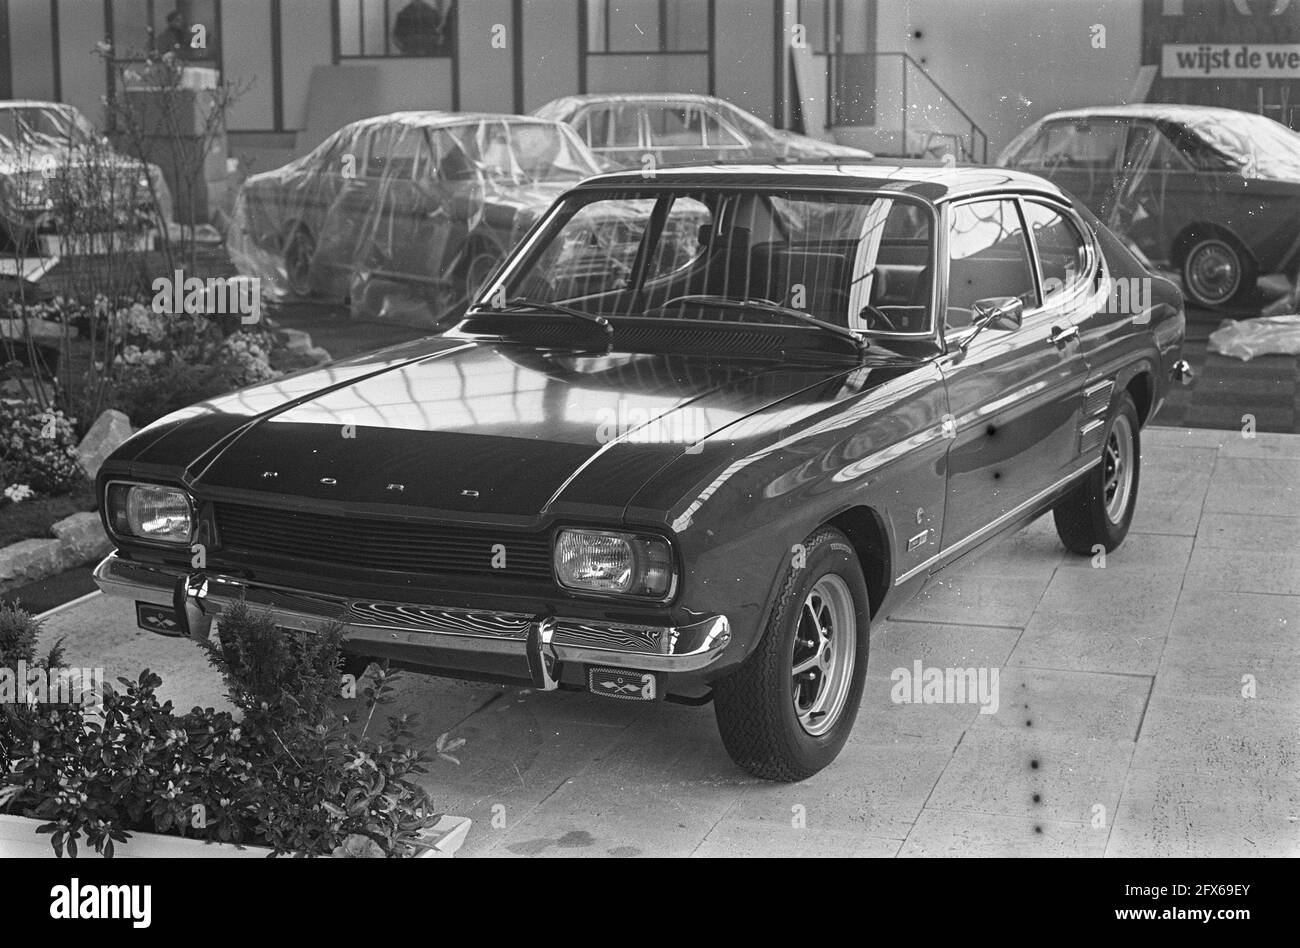 Next Thursday begins 58th RAI exhibition of passenger cars. Ford Capri, February 11, 1969, cars, car trade, fairs, exhibitions, The Netherlands, 20th century press agency photo, news to remember, documentary, historic photography 1945-1990, visual stories, human history of the Twentieth Century, capturing moments in time Stock Photo